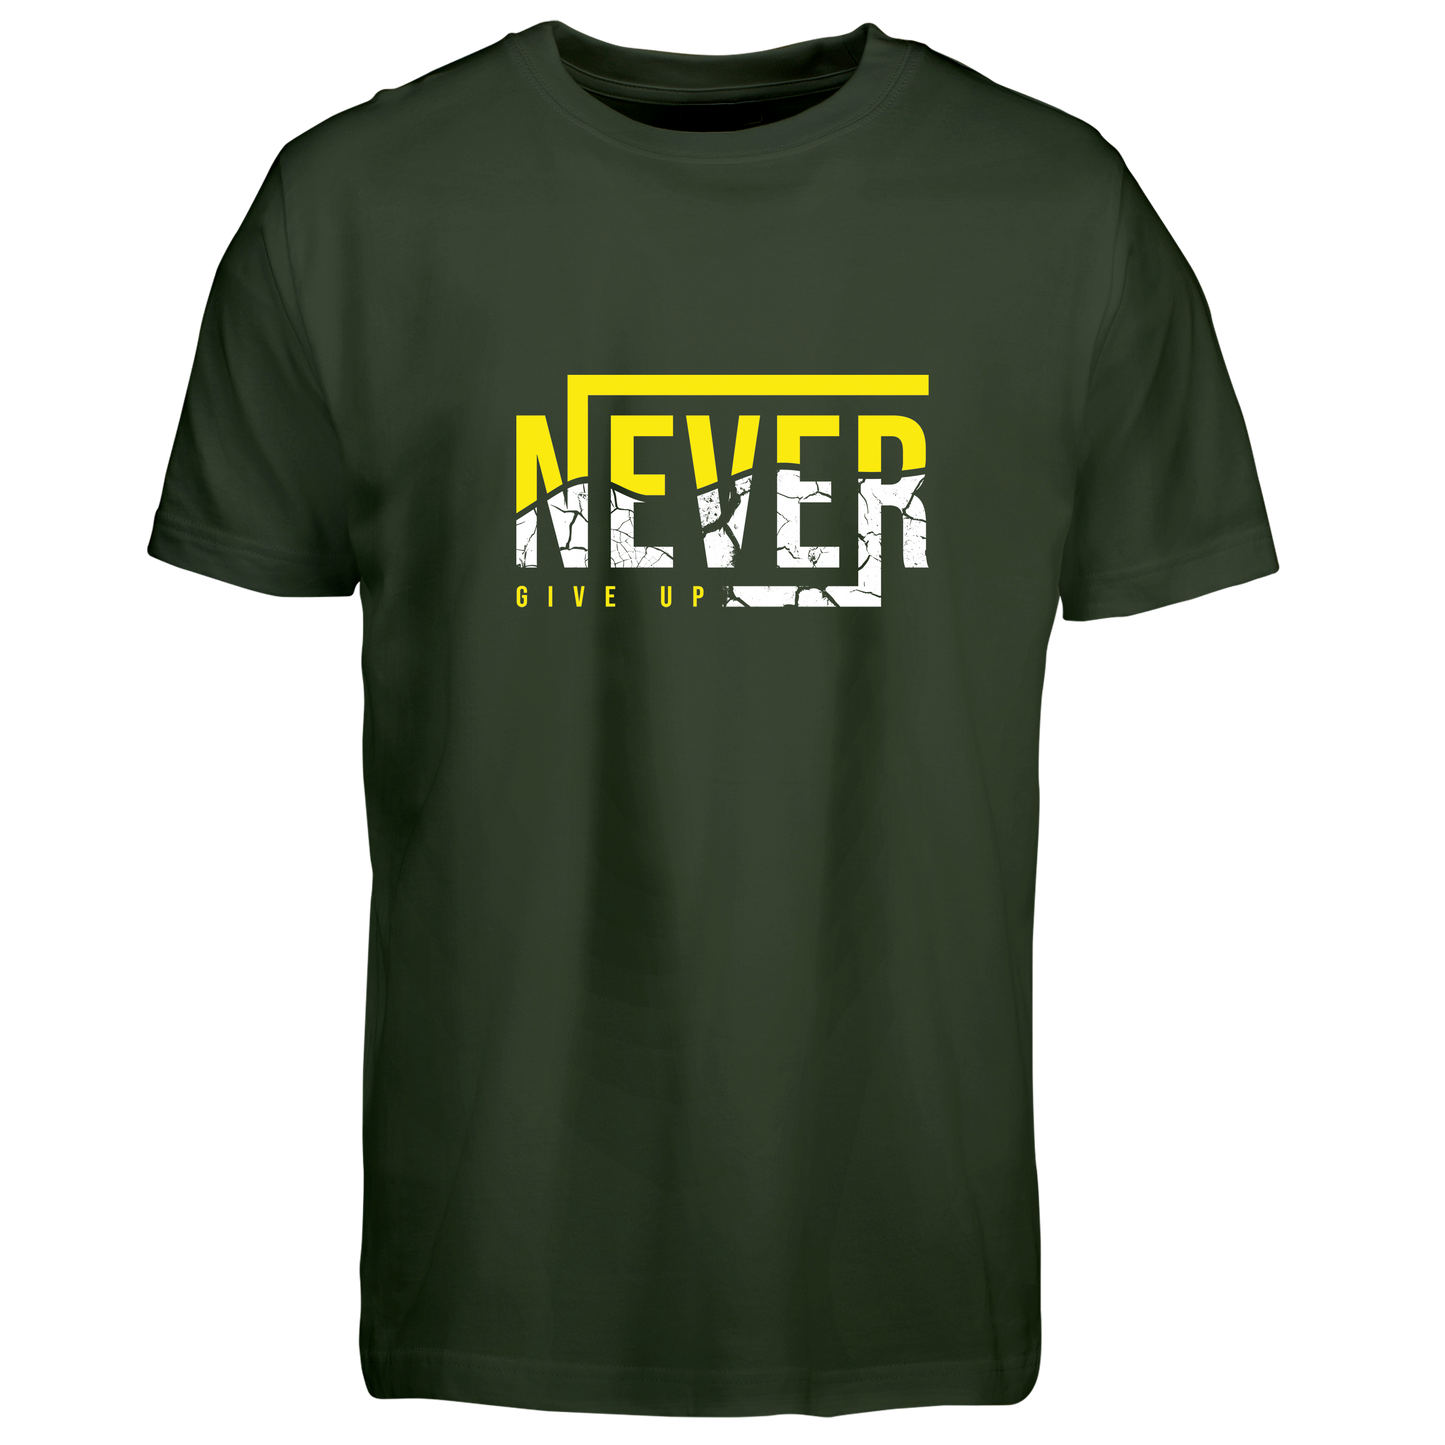 Never give up - t-shirt